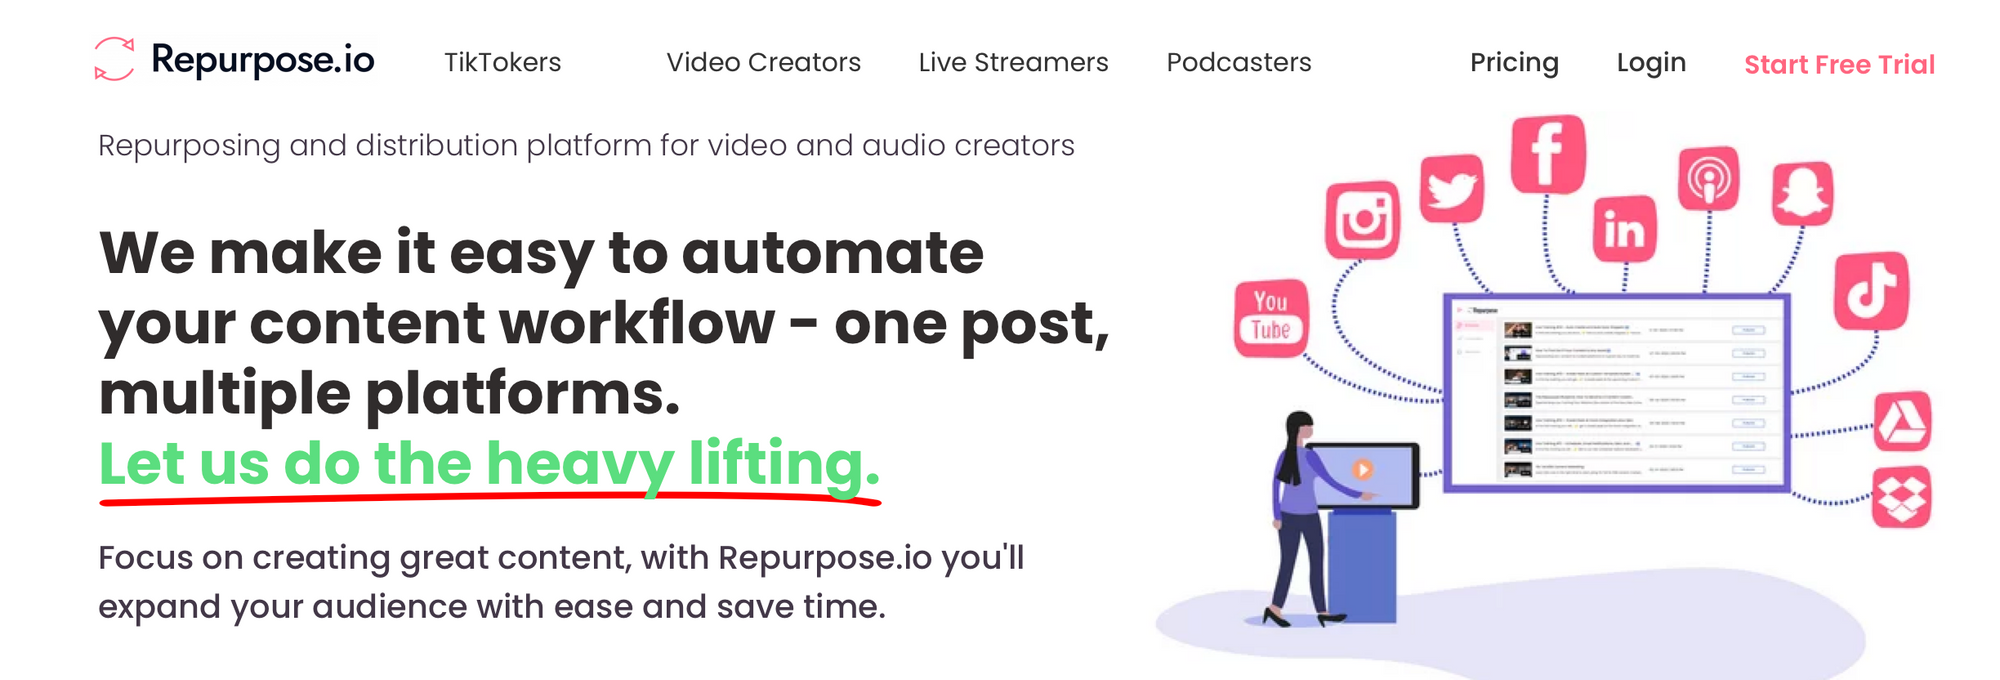 9 Best AI Podcasting Tools: Noise Removal, Localisation, Editing & More